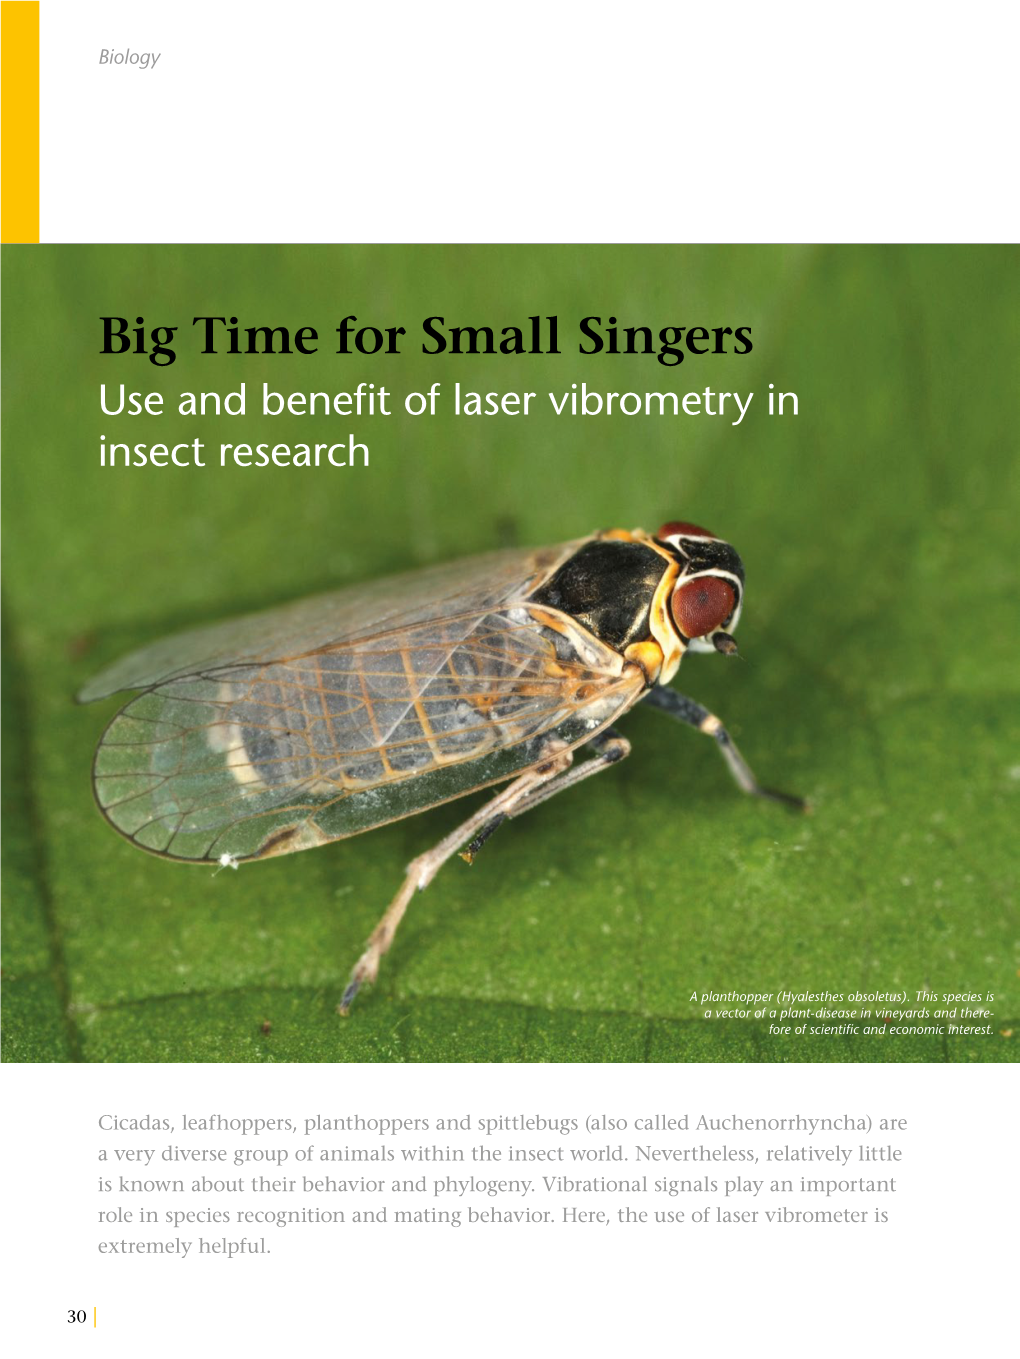 Big Time for Small Singers Use and Benefit of Laser Vibrometry in Insect Research